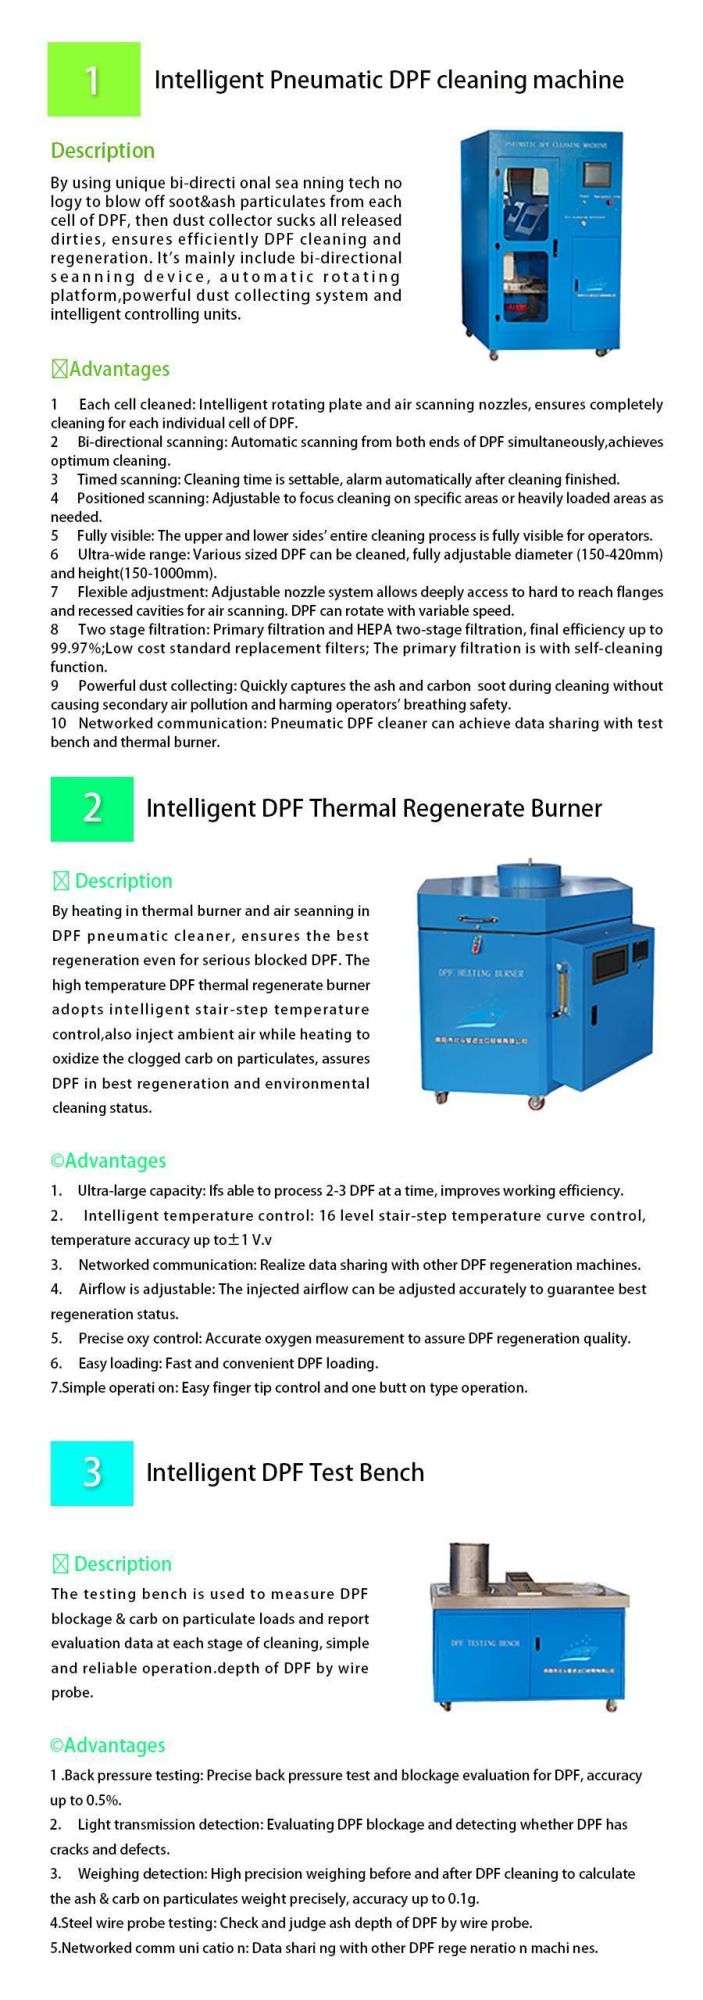 Intelligent DPF Thermal Regenerate Burner and Pneumatic DPF Cleaning Machine with DPF Test Bench